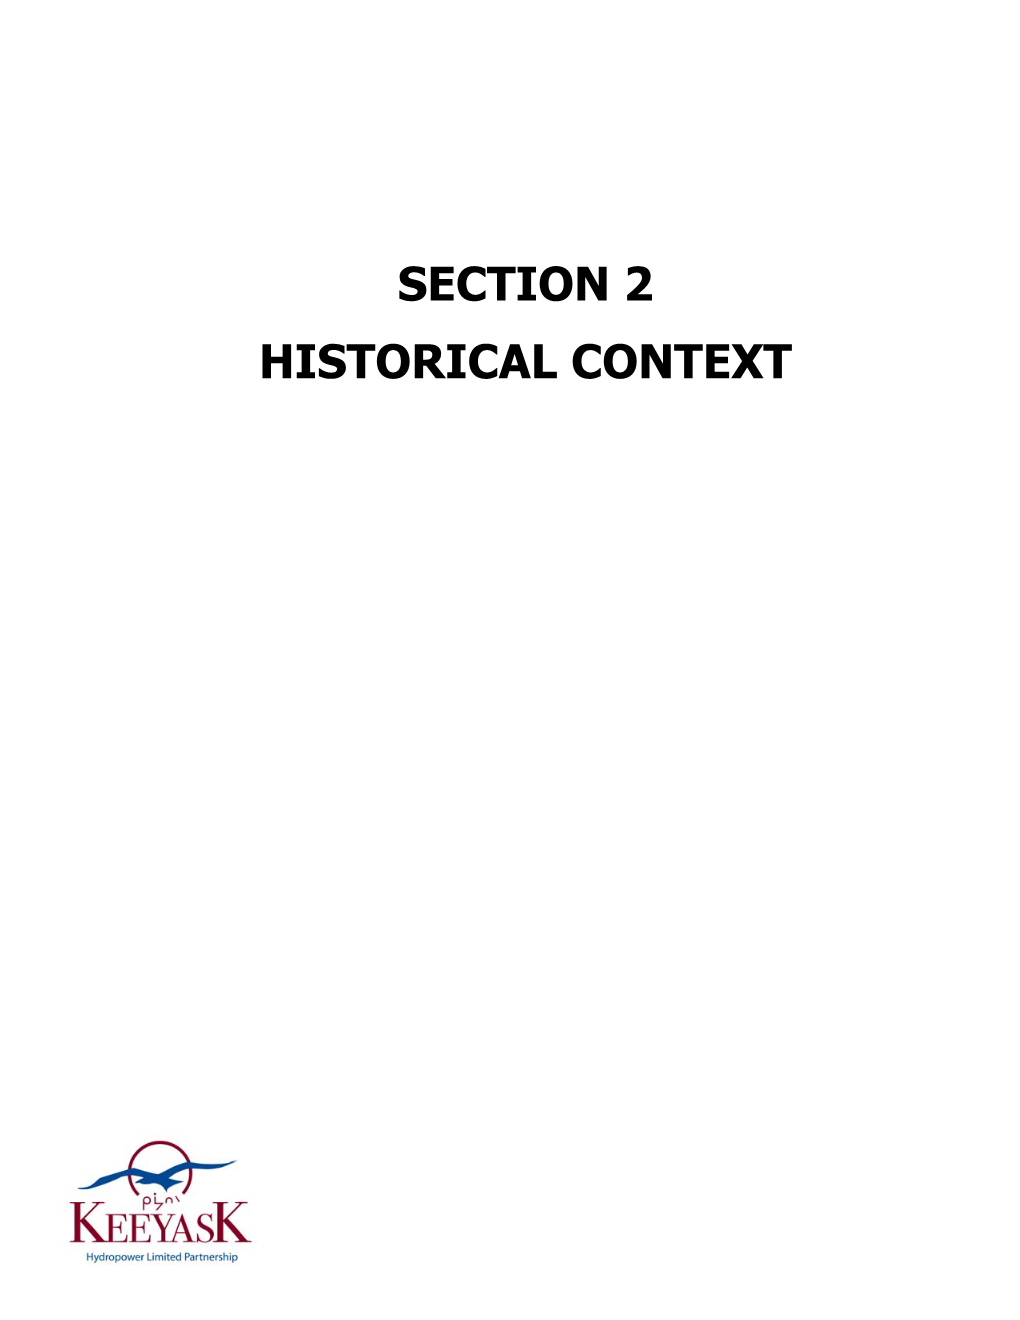 Section 2 Historical Context